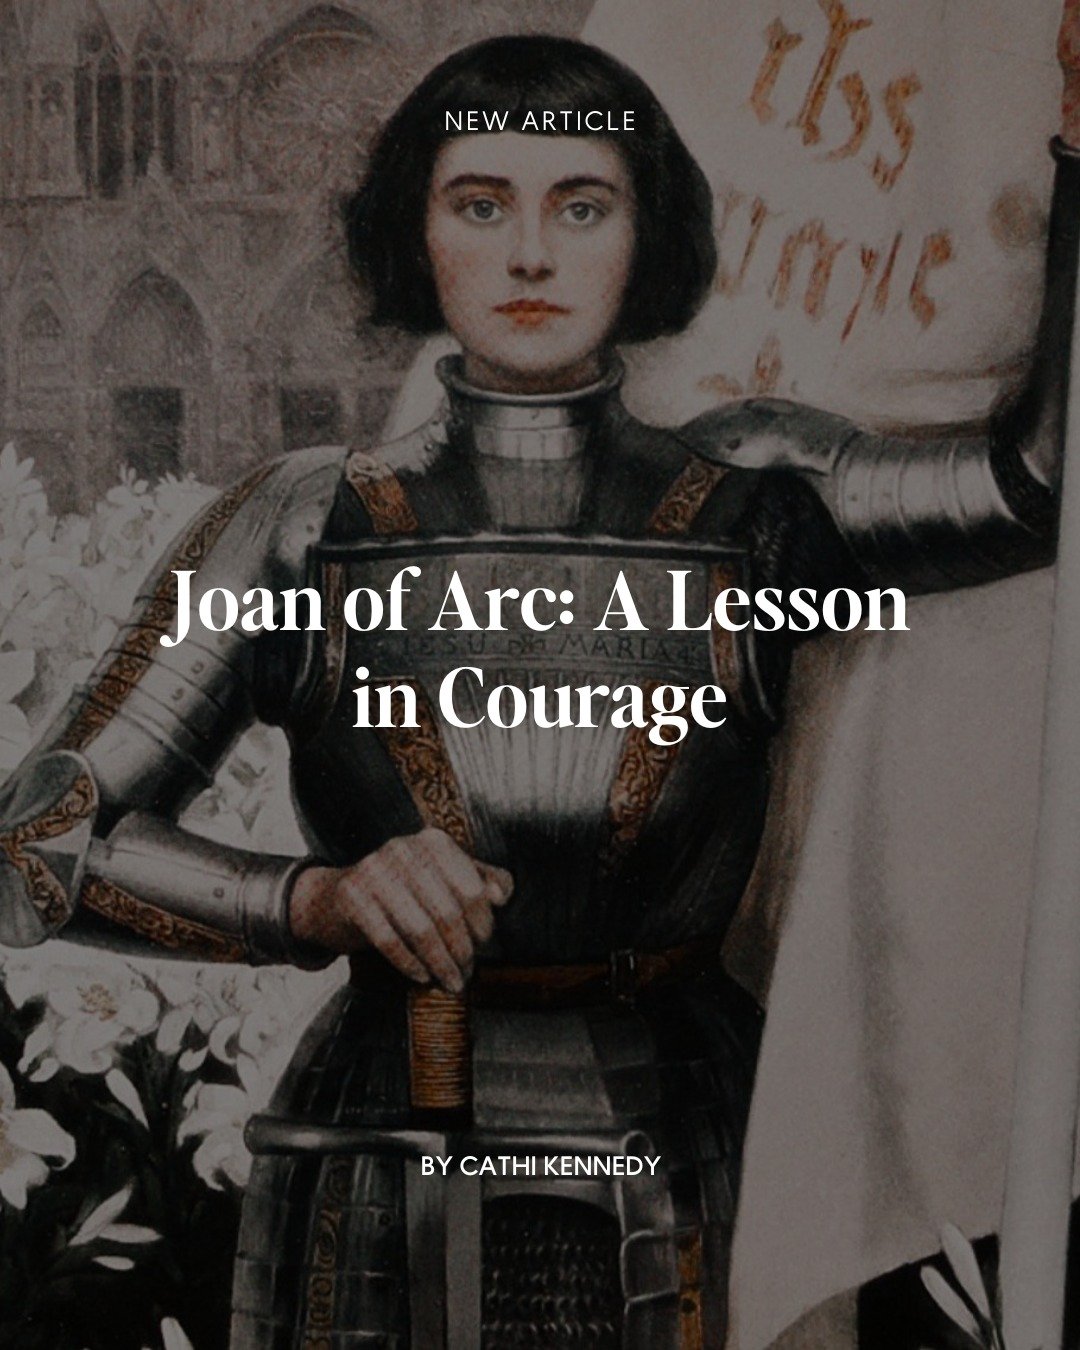 &quot;St. Joan of Arc was 14 when she first heard the voices of saints. She kept it quiet for several years. Then, at 18, she confidently demanded and gained an audience with the Dauphin (the heir to the throne of France). Soon after, dressed in men&